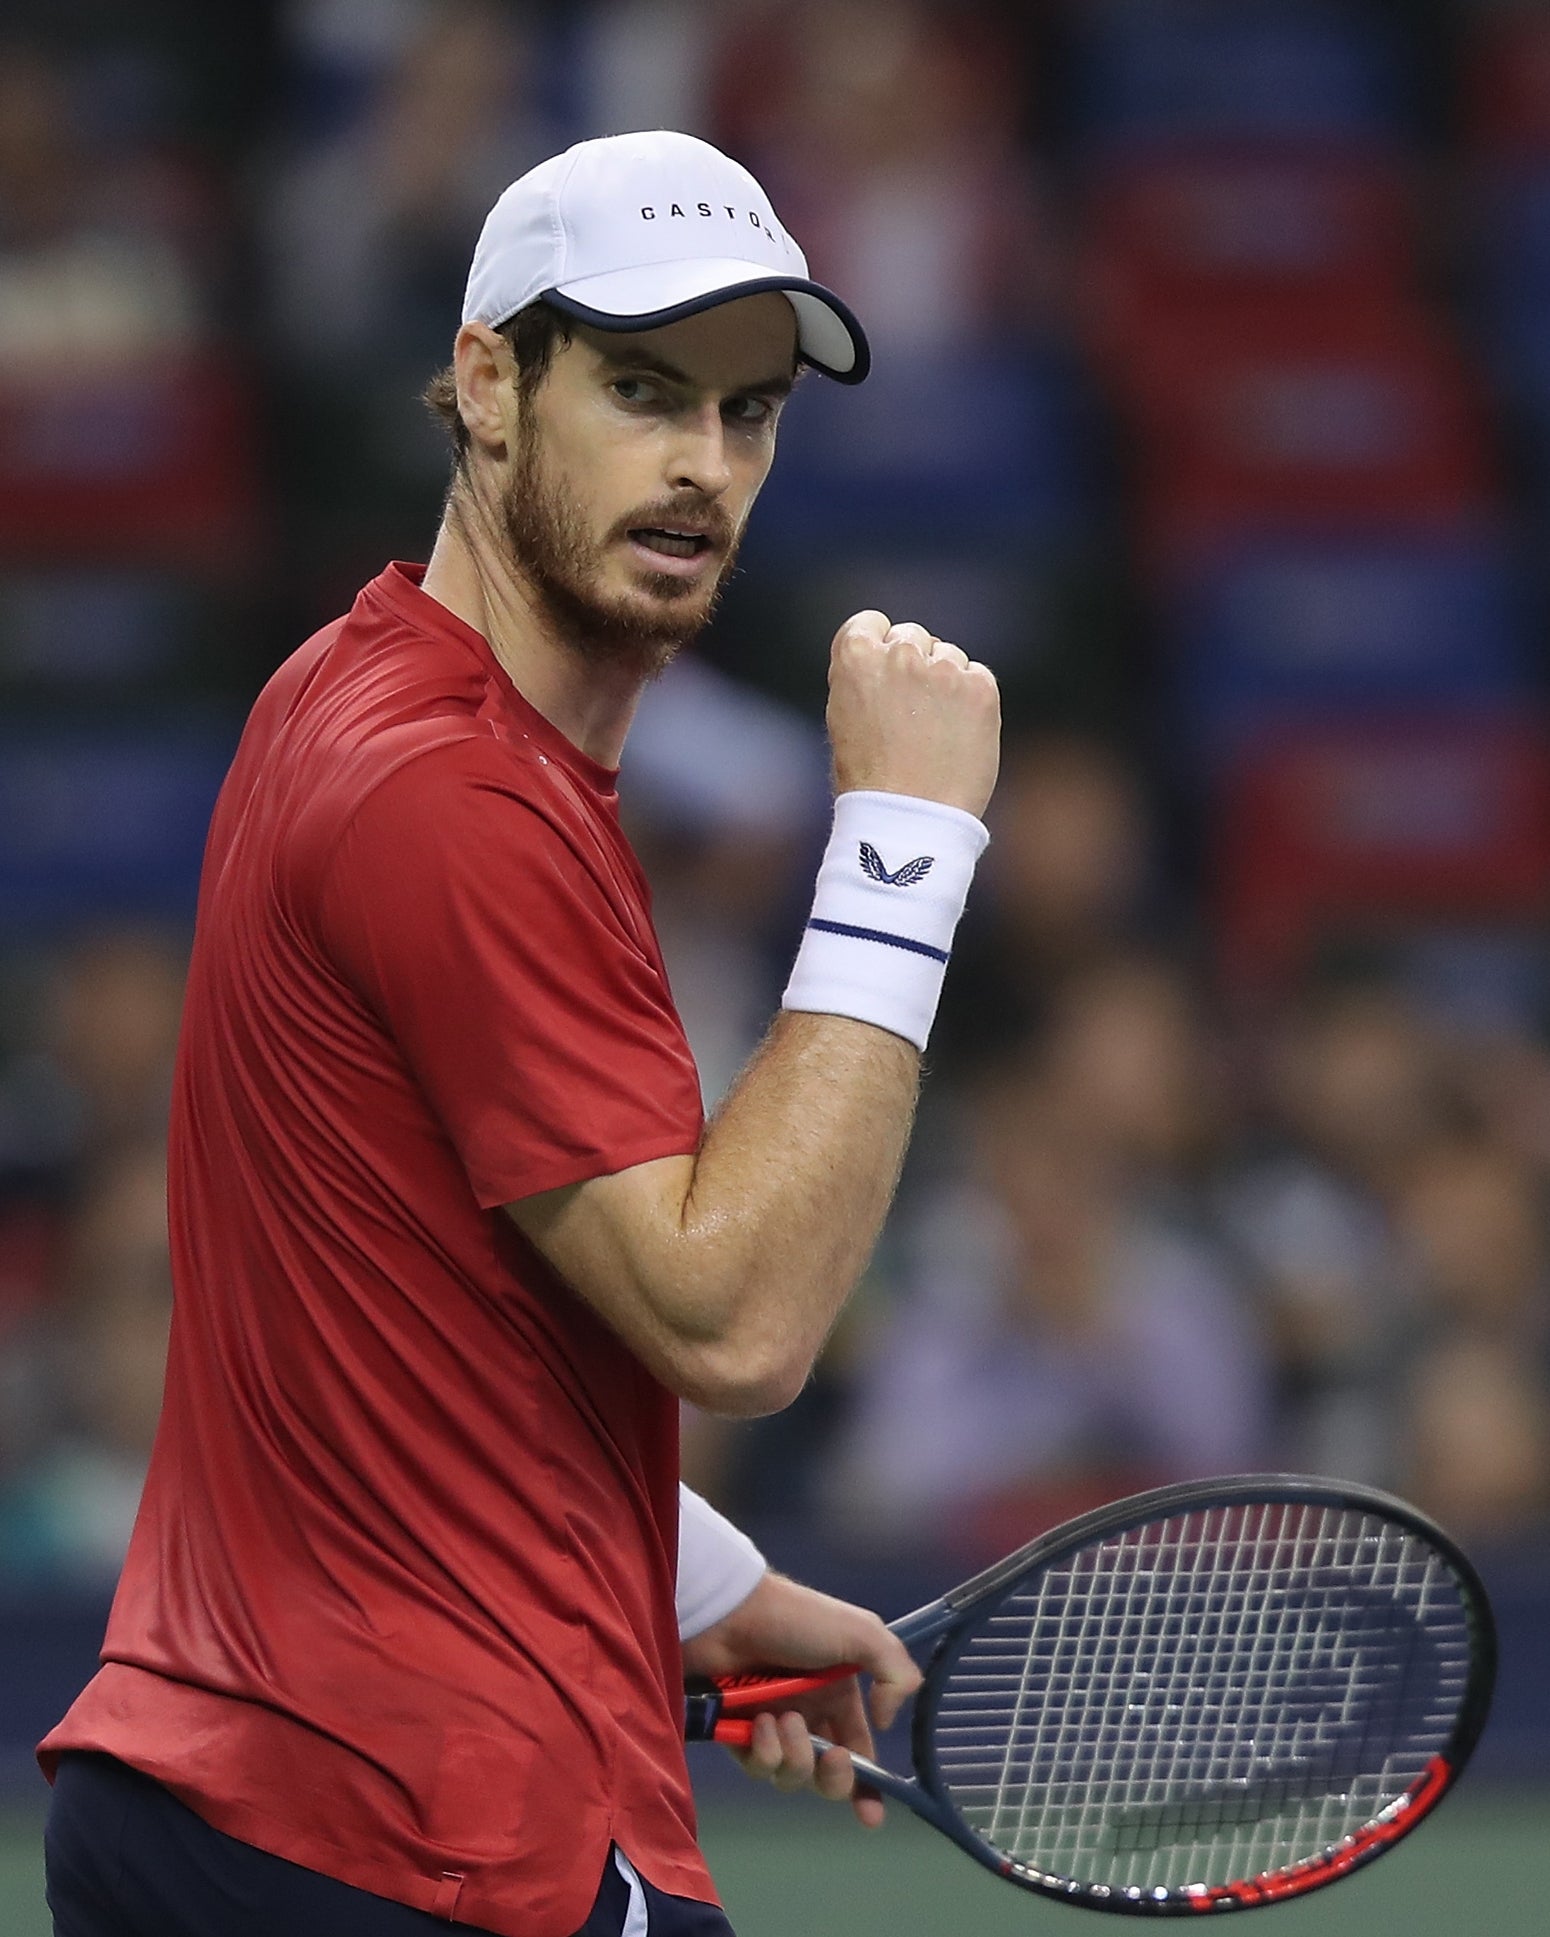 Murray has picked up momentum on his return to singles